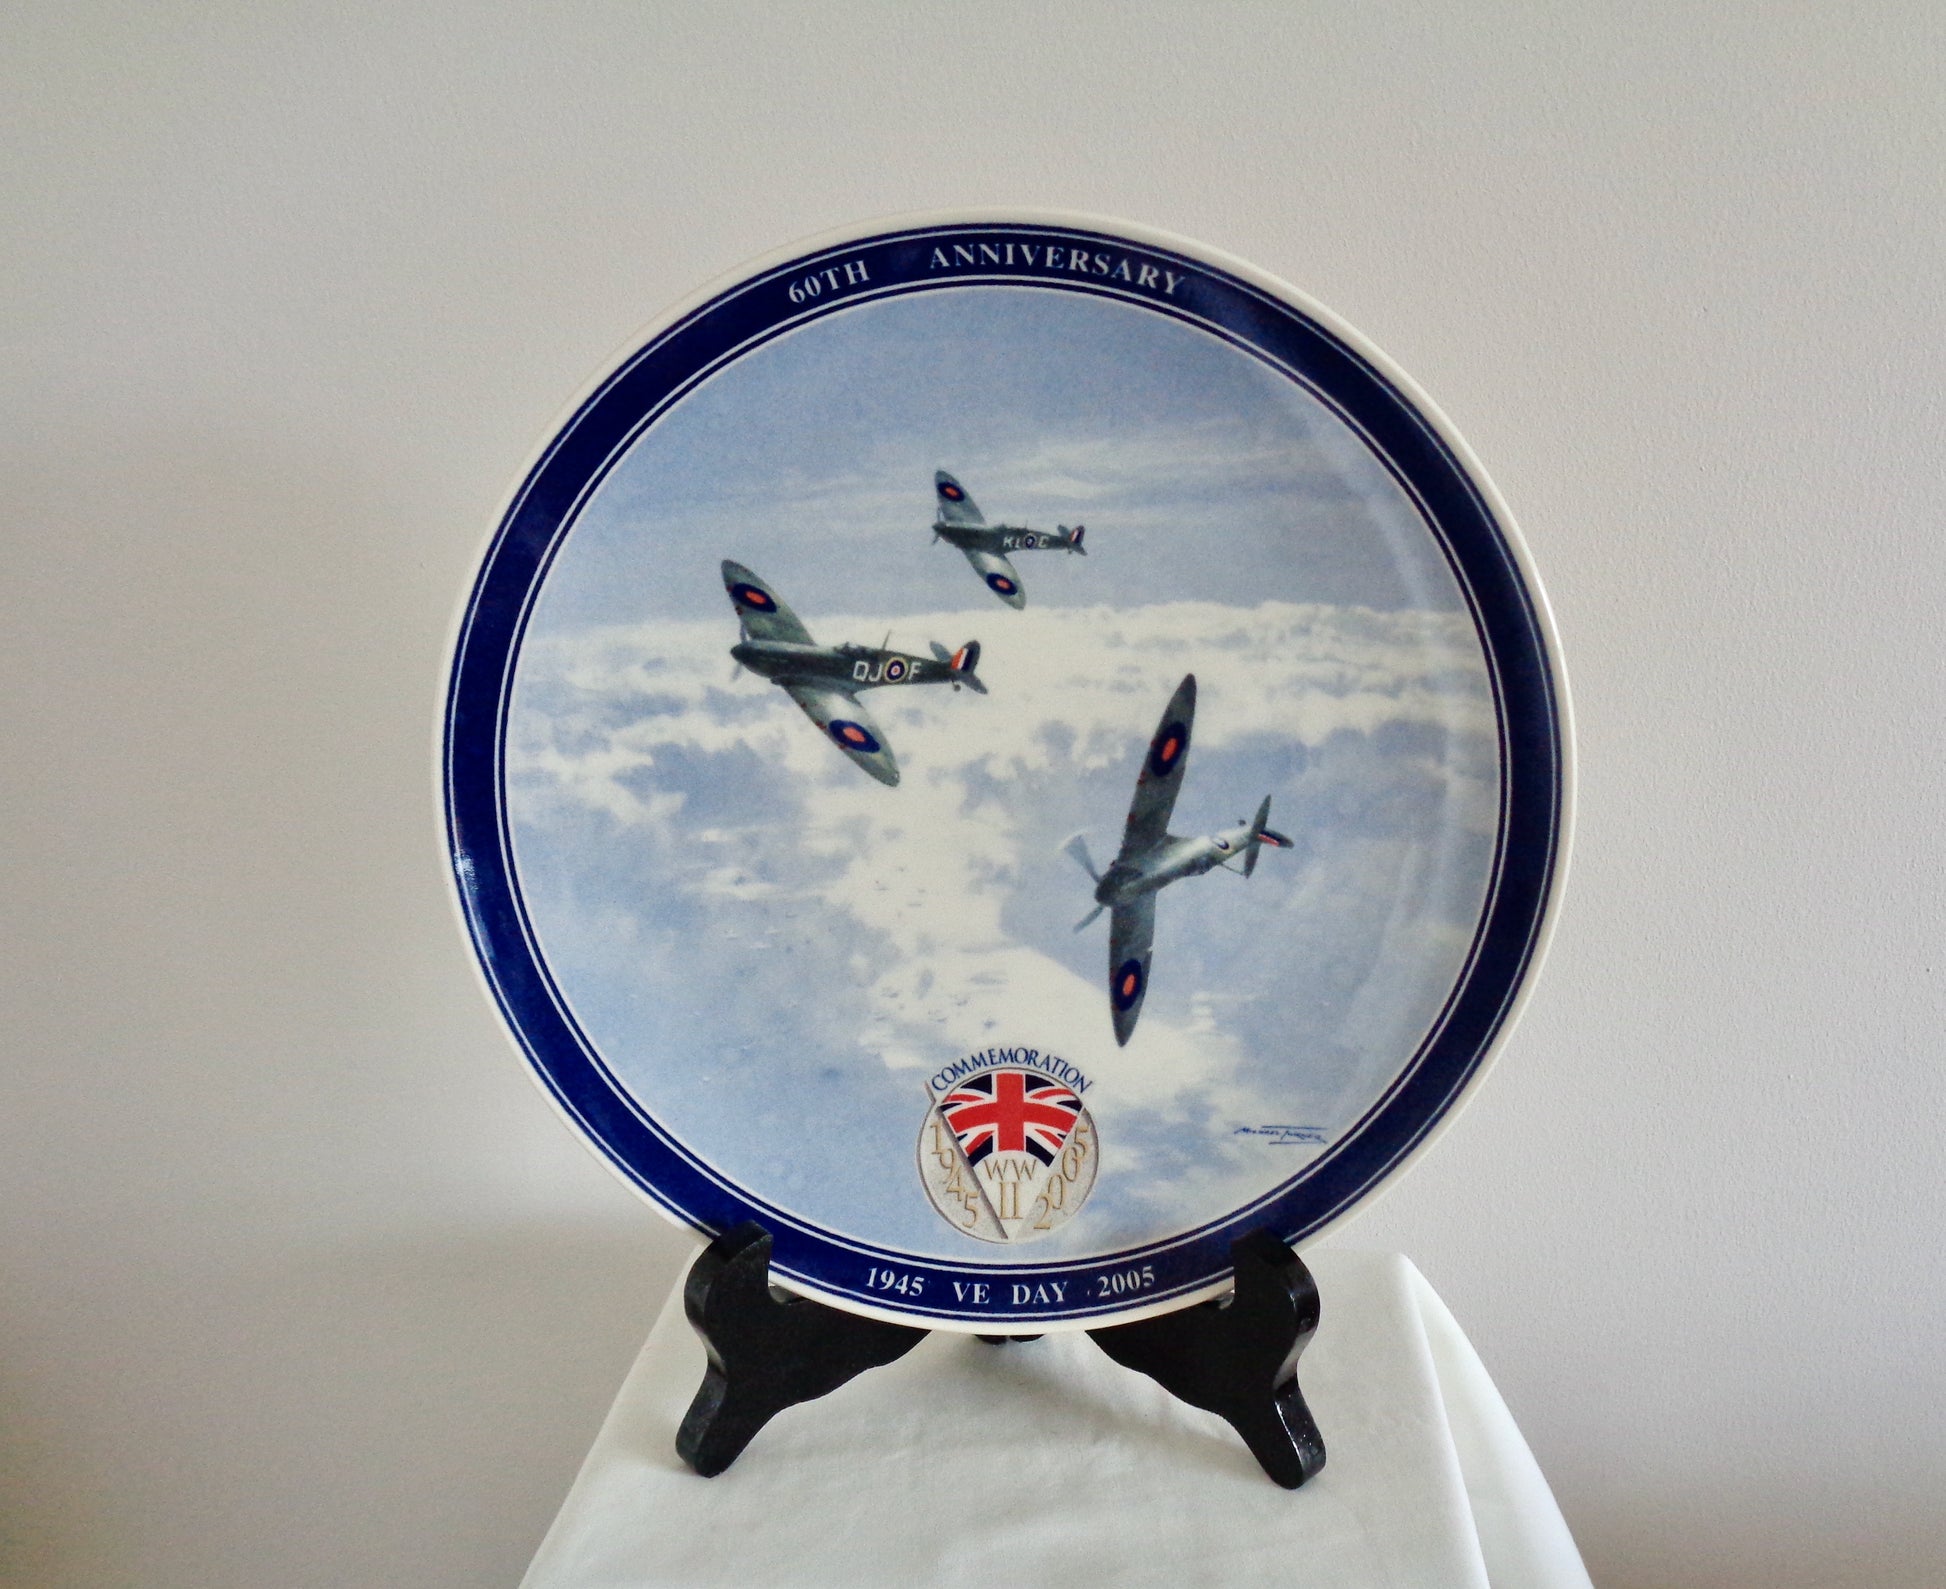 Wedgwood 60th Anniversary VE Day Commemorative Plate